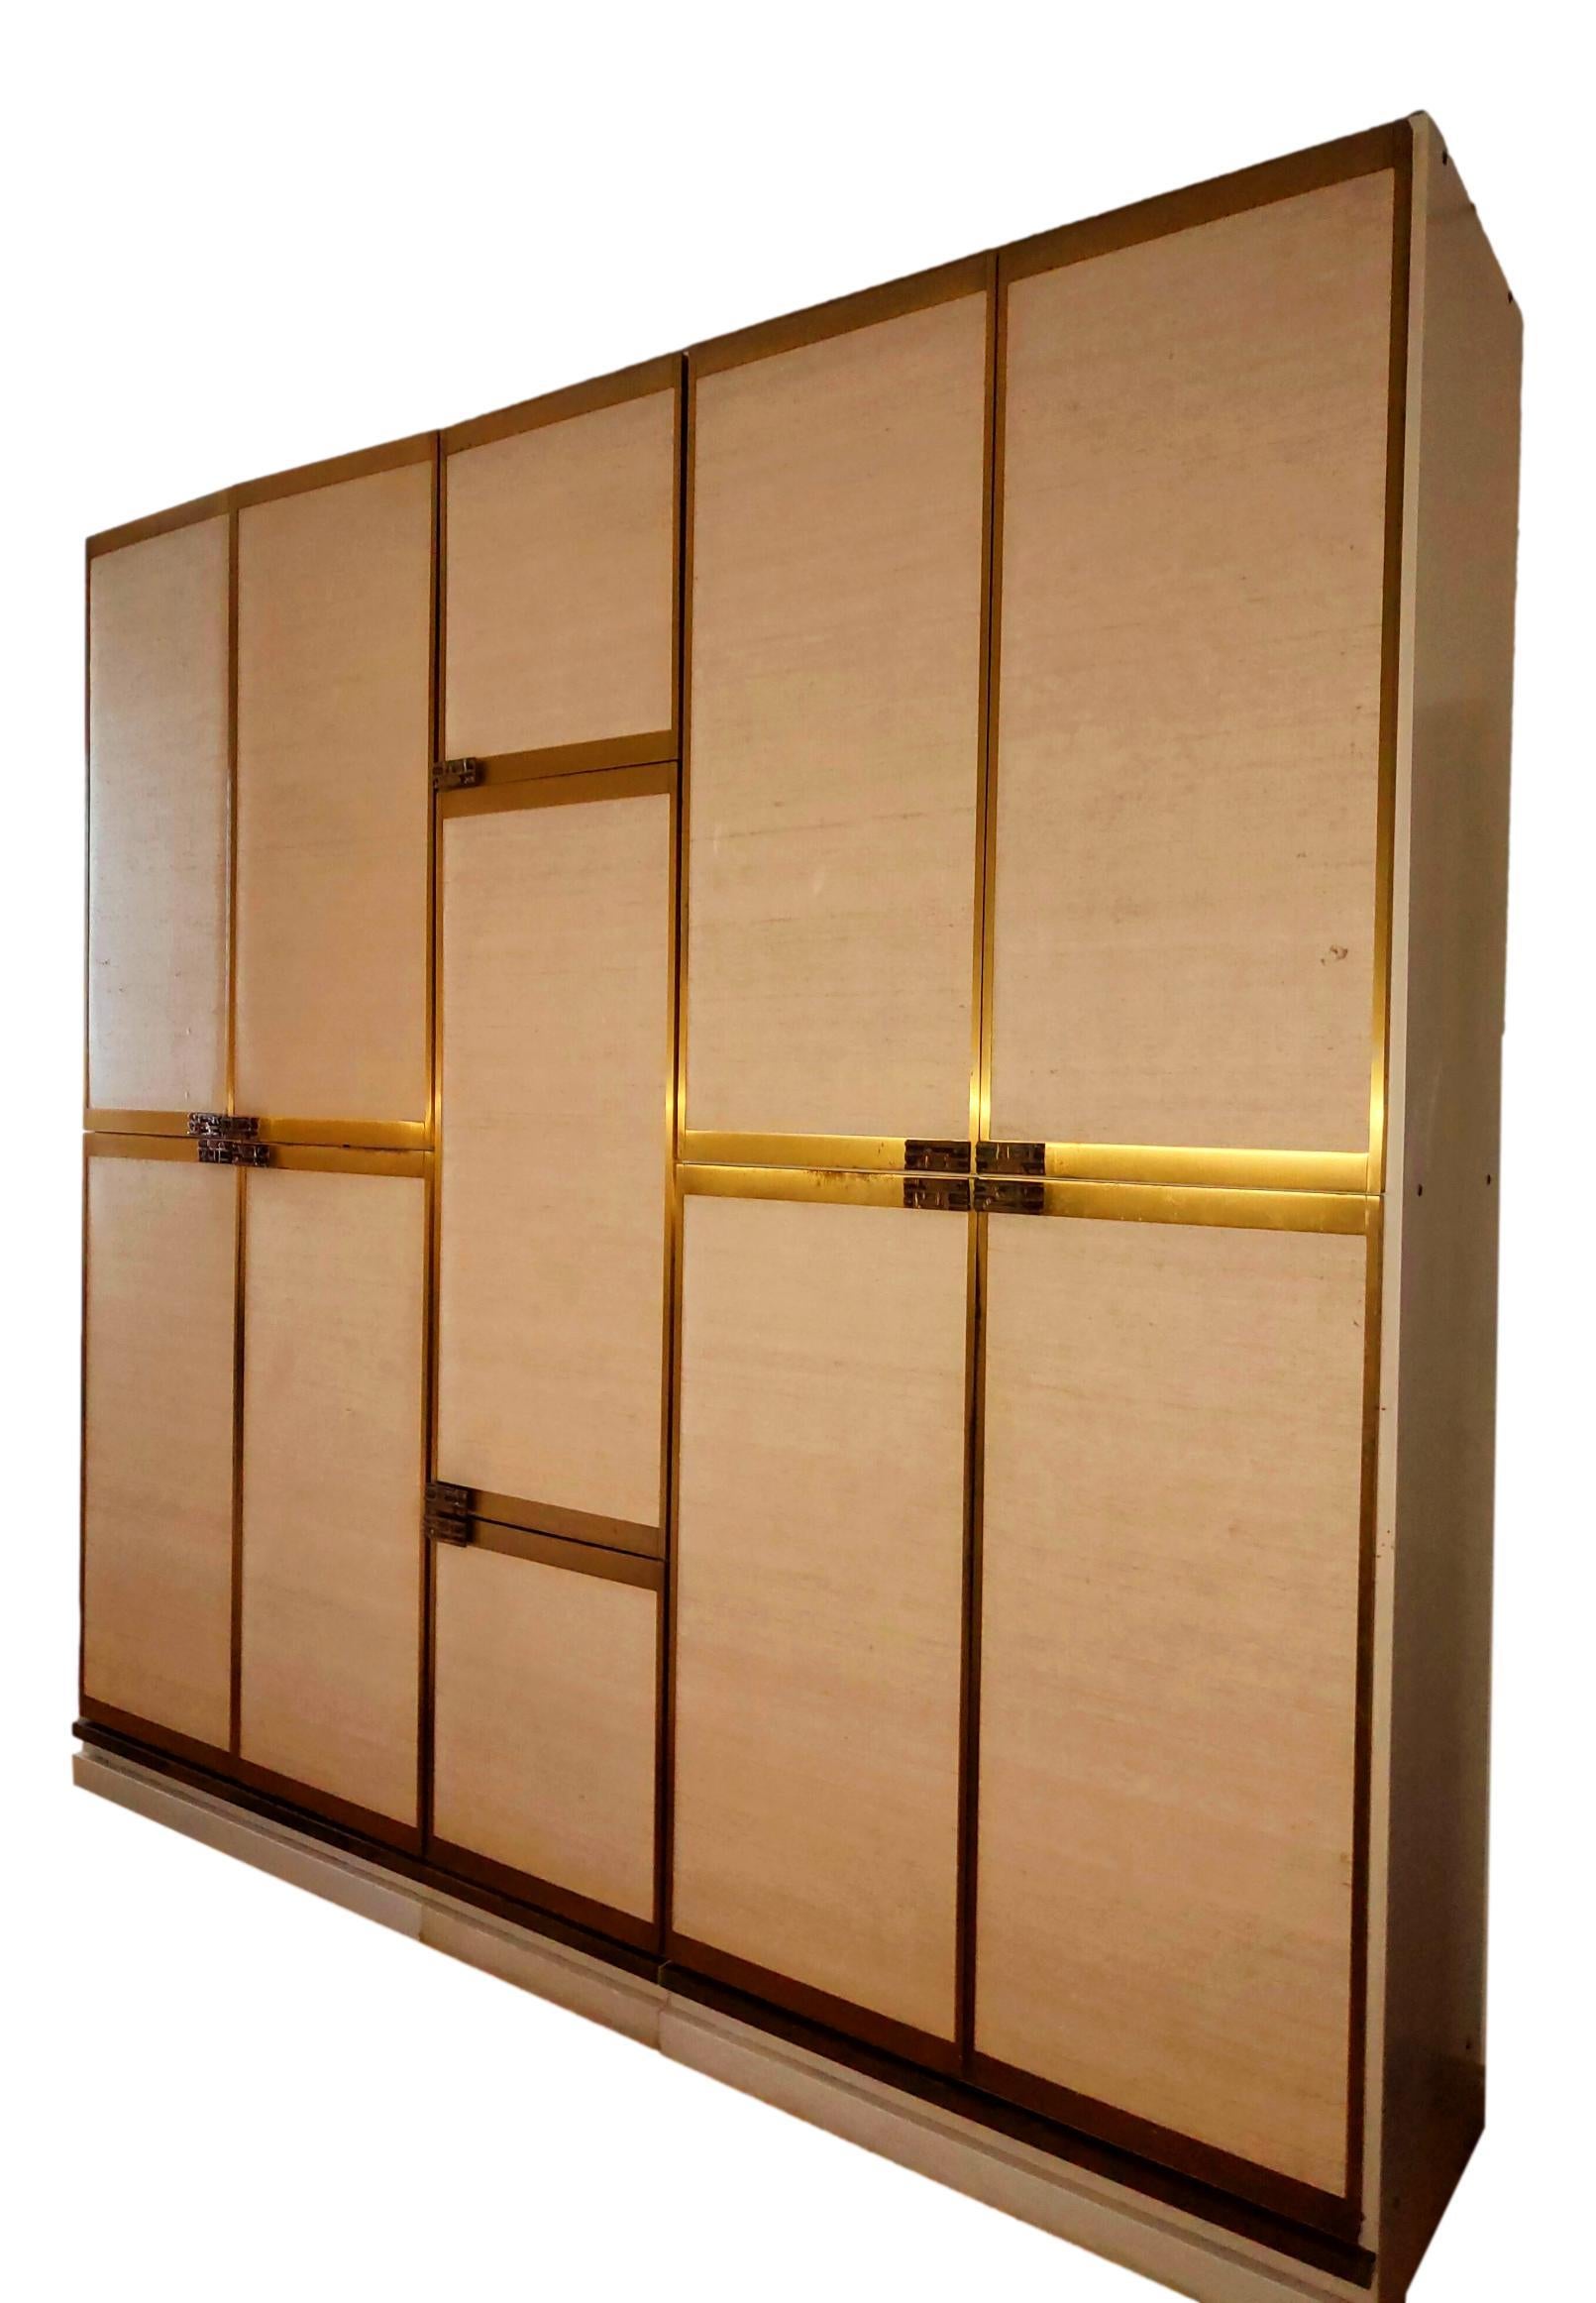 stunning 11-opening closet, design luciano frigerio, featuring bronze handles, brass frames, and beige fabric panels.

measures about 290 cm wide, 63 cm deep and 280 cm high  (...possibly ask us for exact measurements)

good condition, brass with